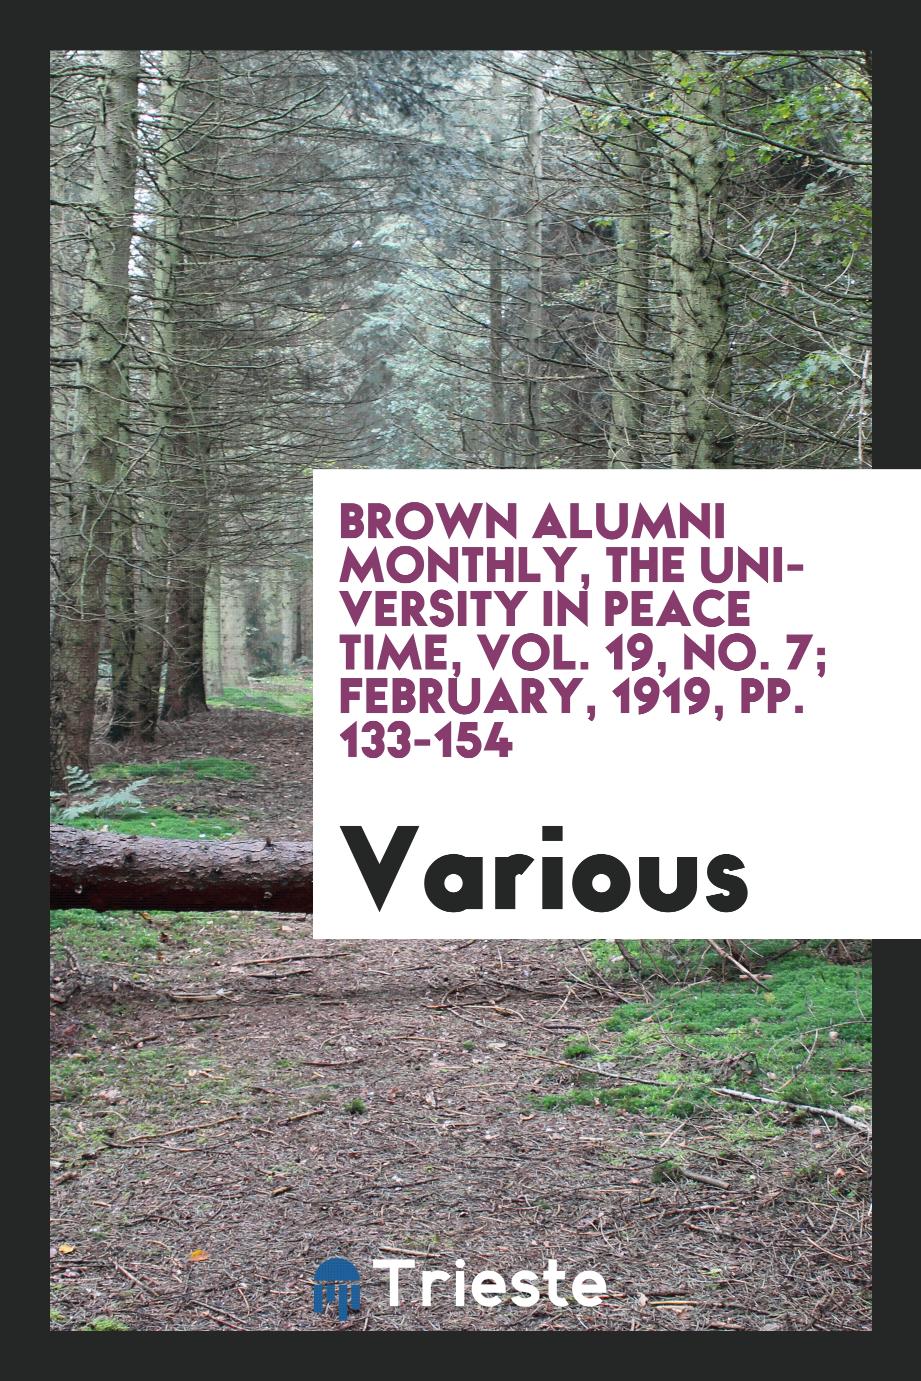 Brown alumni monthly, The university in peace time, Vol. 19, No. 7; February, 1919, pp. 133-154